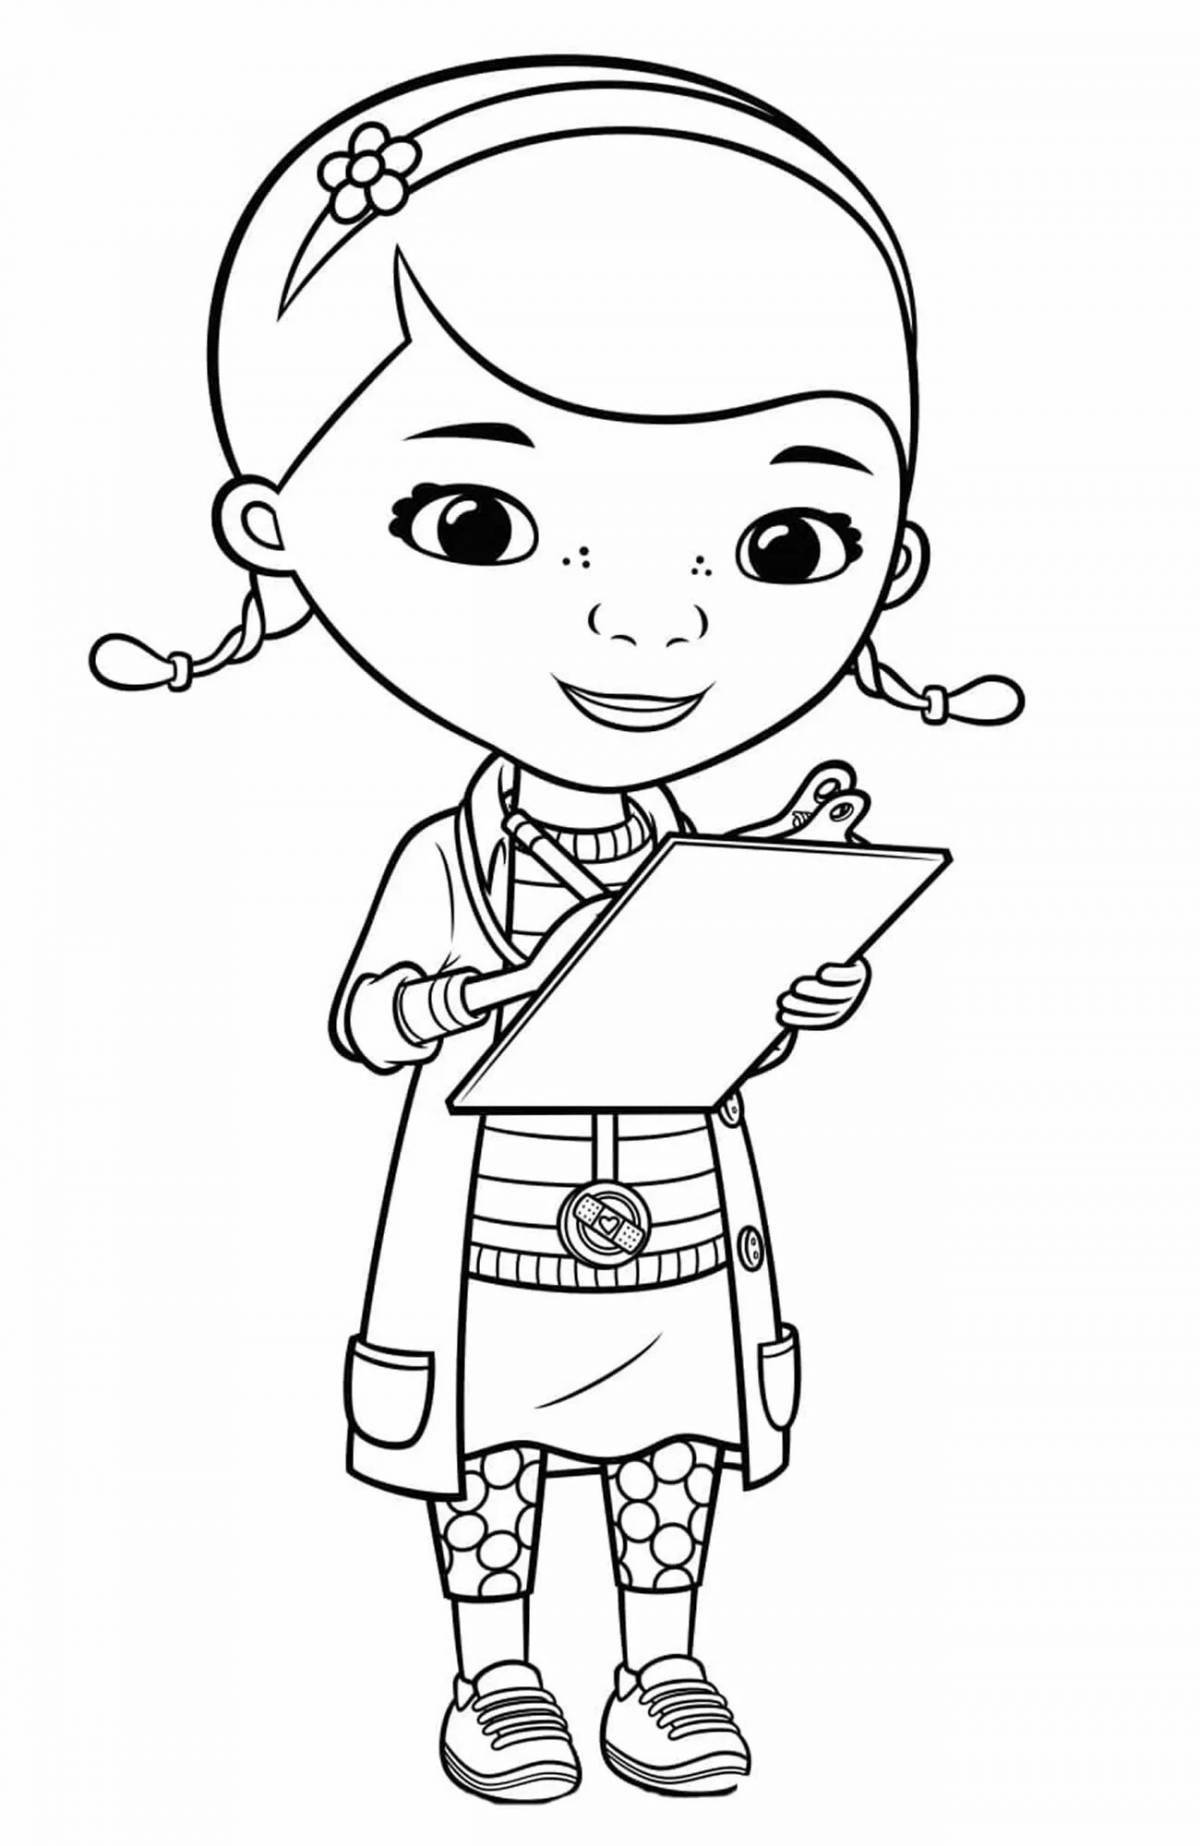 Playful doctor plush coloring book for kids